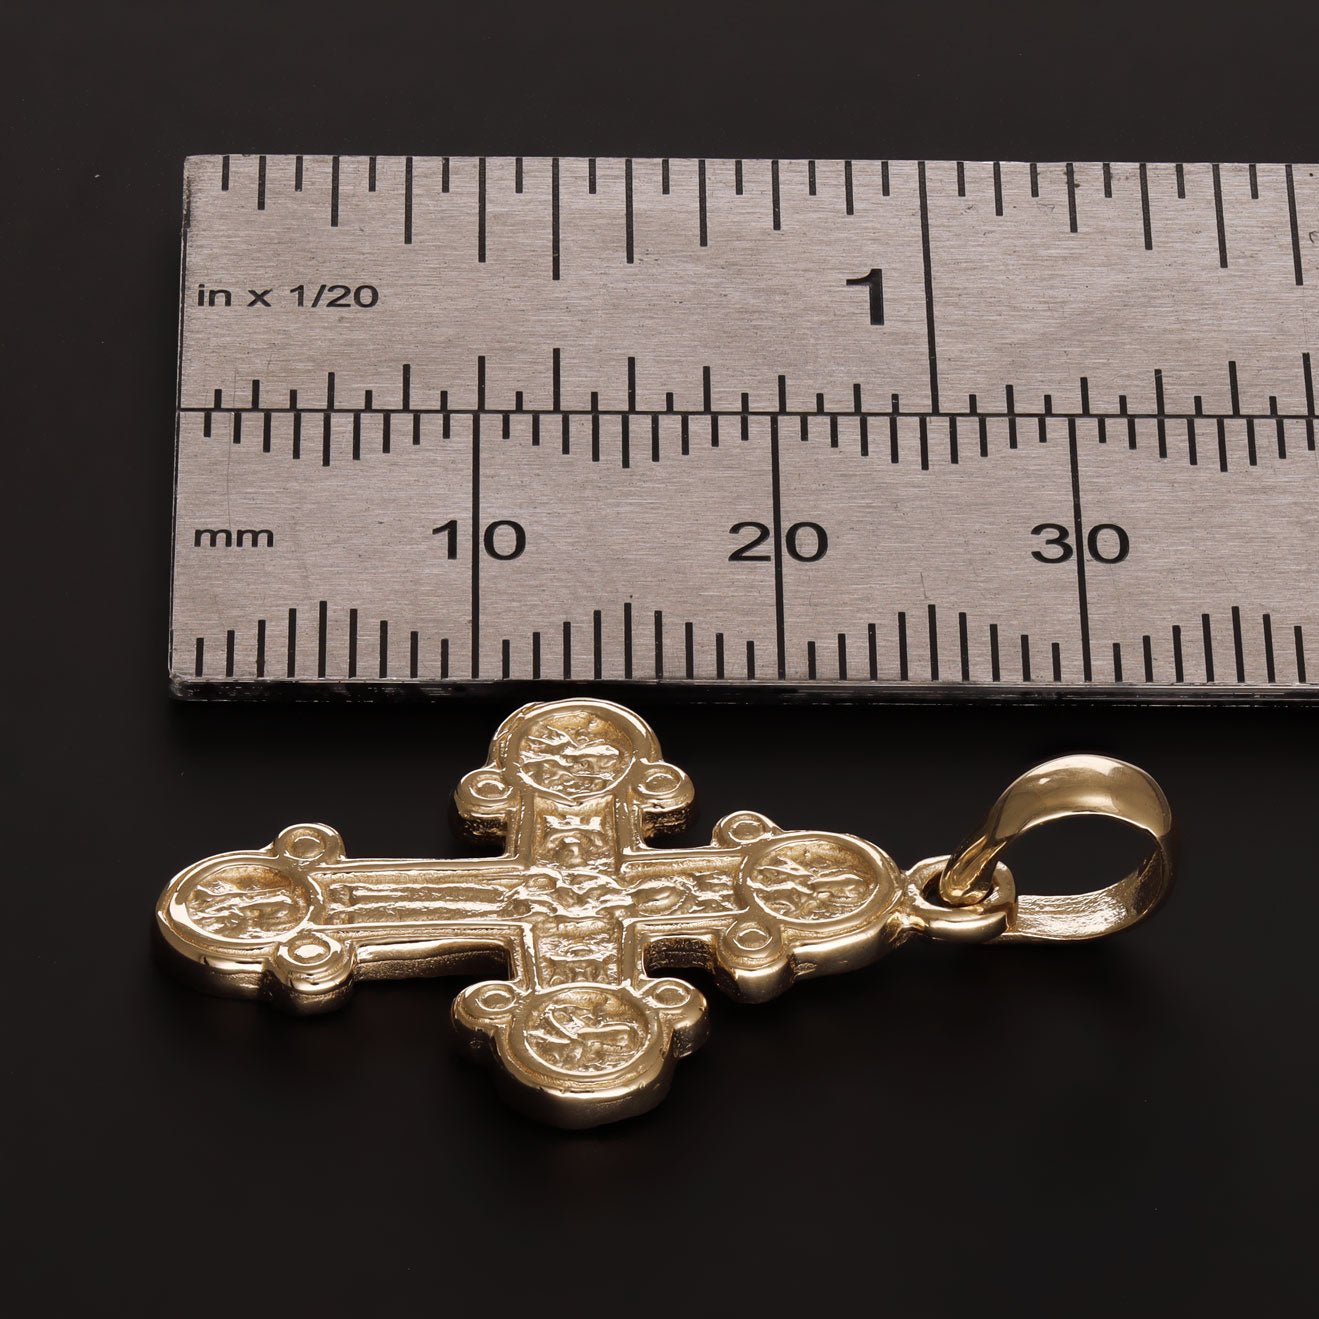 14ct Gold Russian Orthodox Patterned Cross Pendant - 33mm - FJewellery